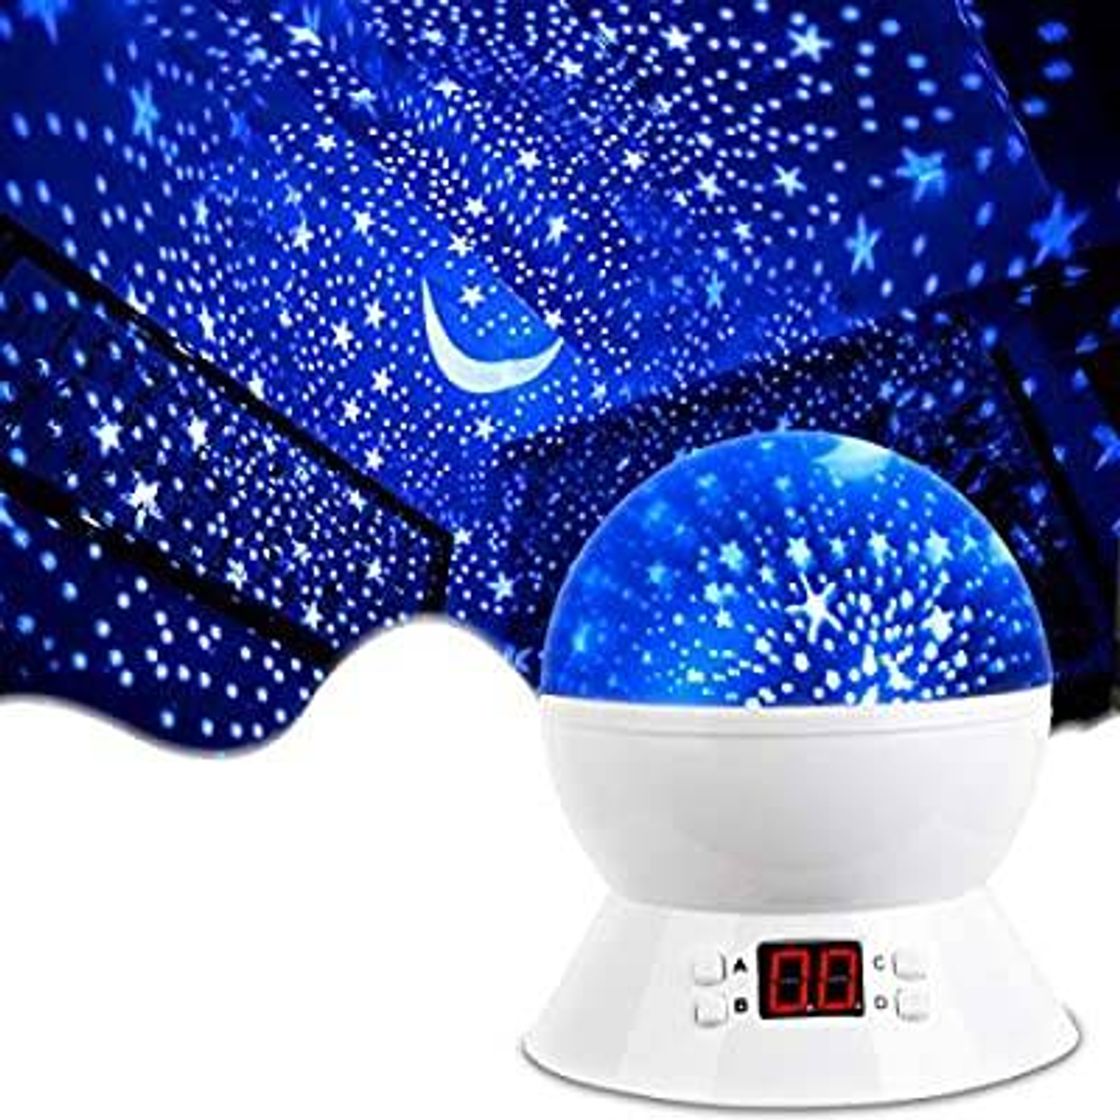 MOKOQI Star Projector Night Lights for Kids with Timer